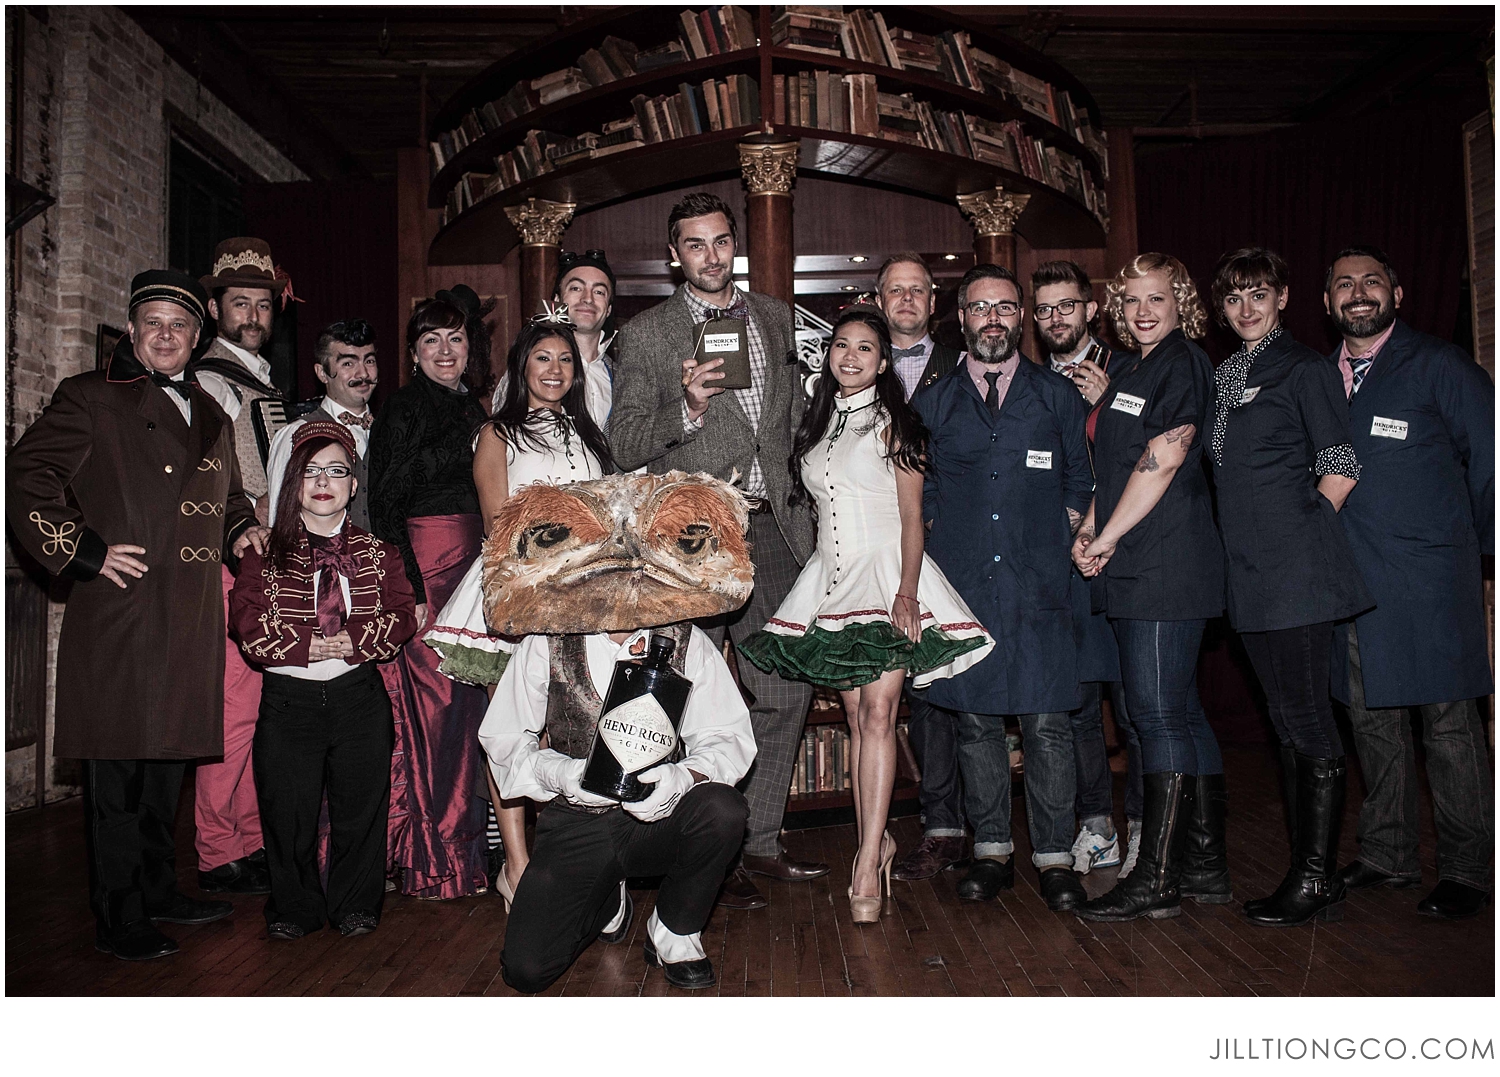 Hendrick's Gin Voyages into the Unusual | Chicago Event Photographer | Jill Tiongco Photography